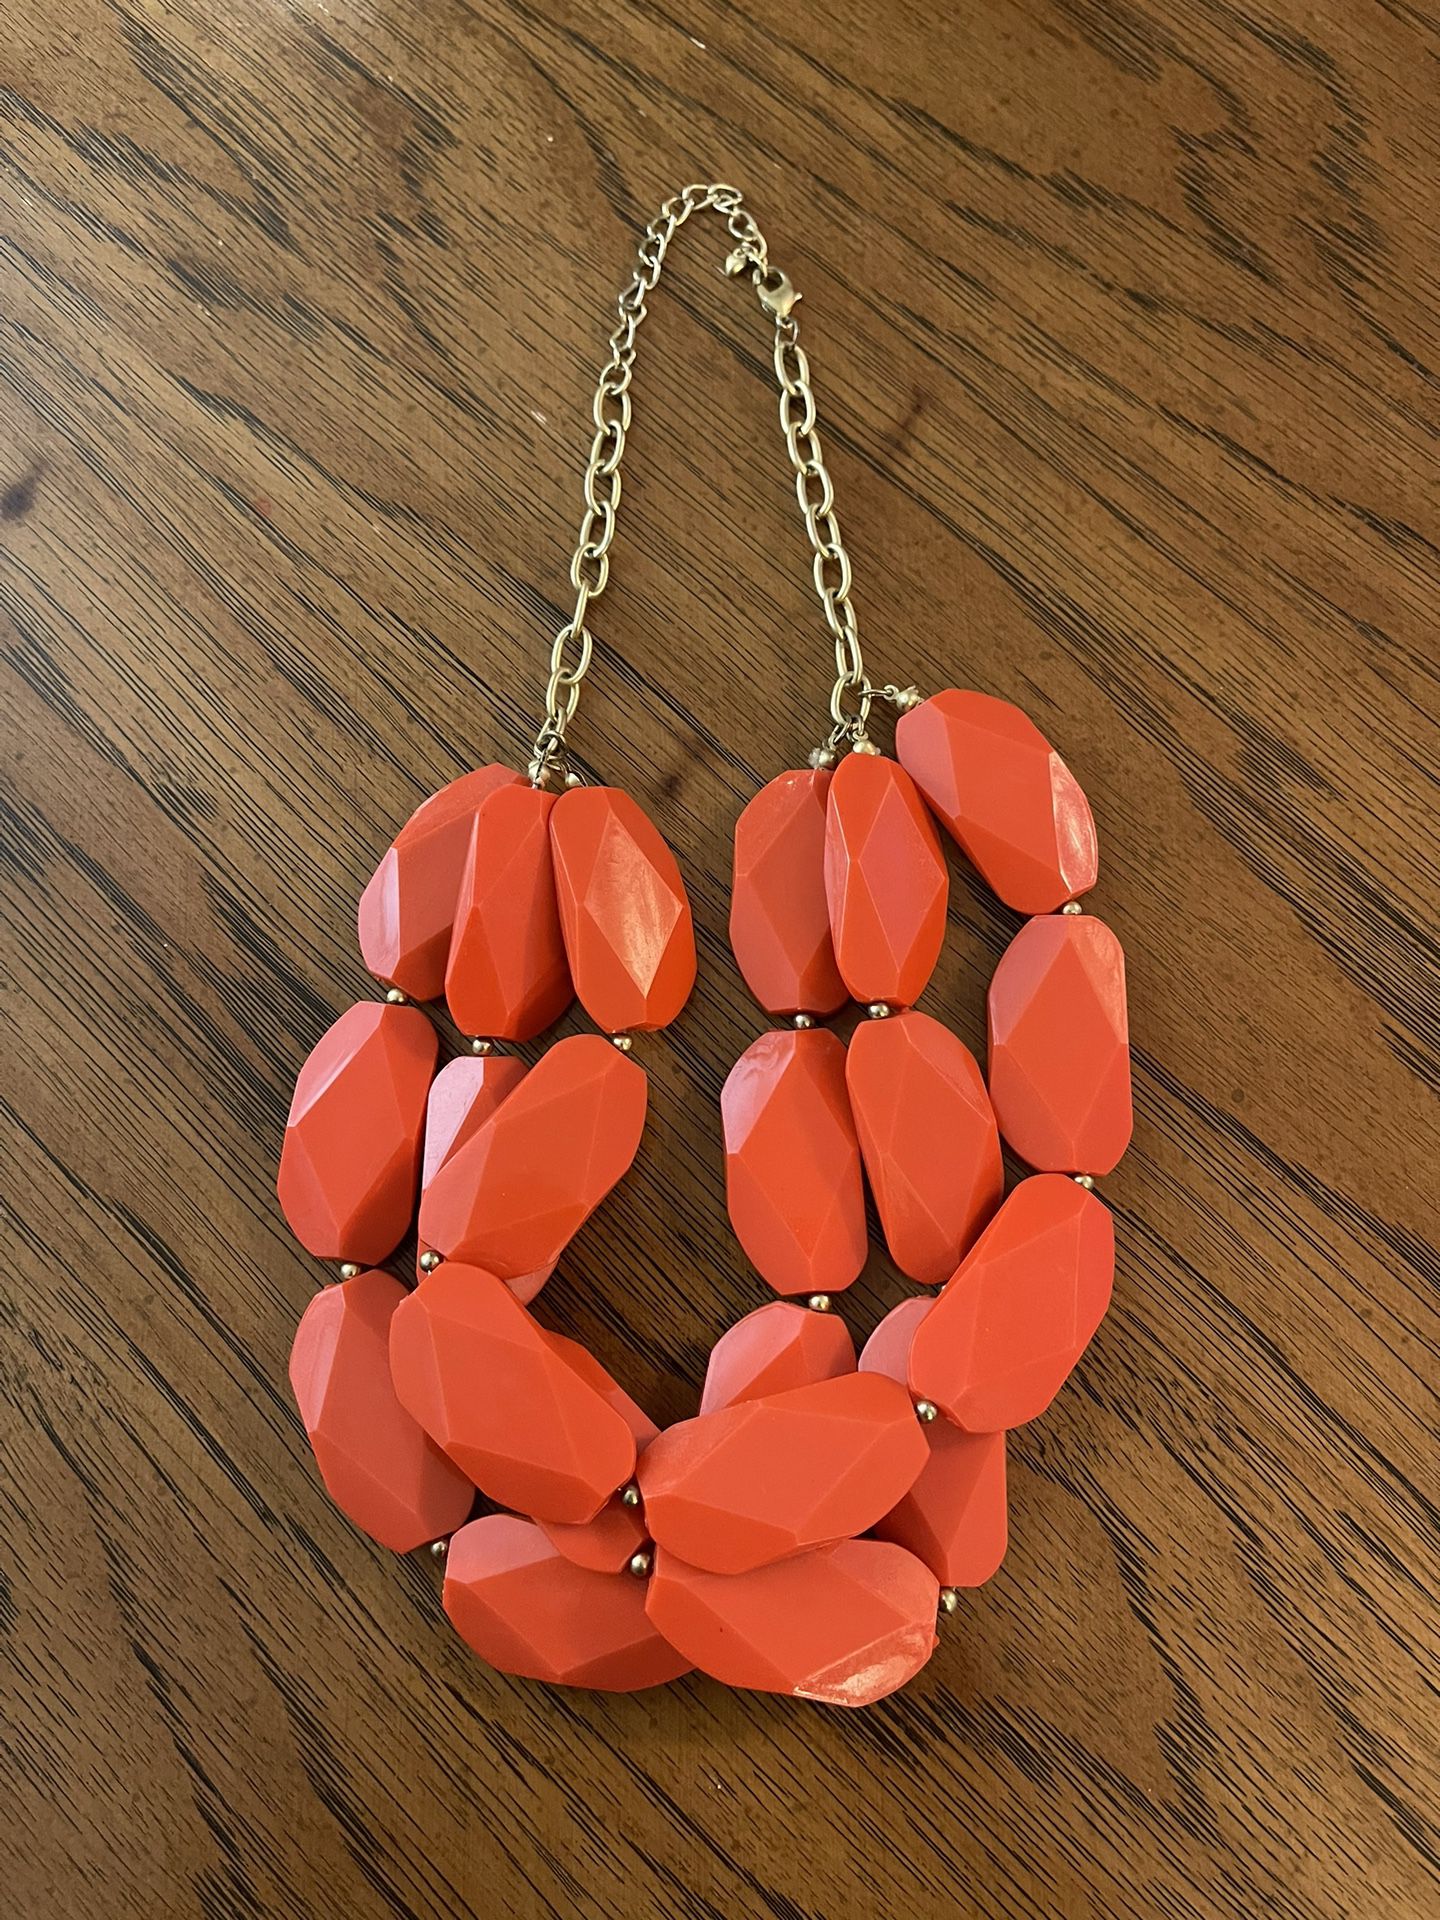 Chunky Orangey Red Statement Piece Necklace with Gold Toned Chain